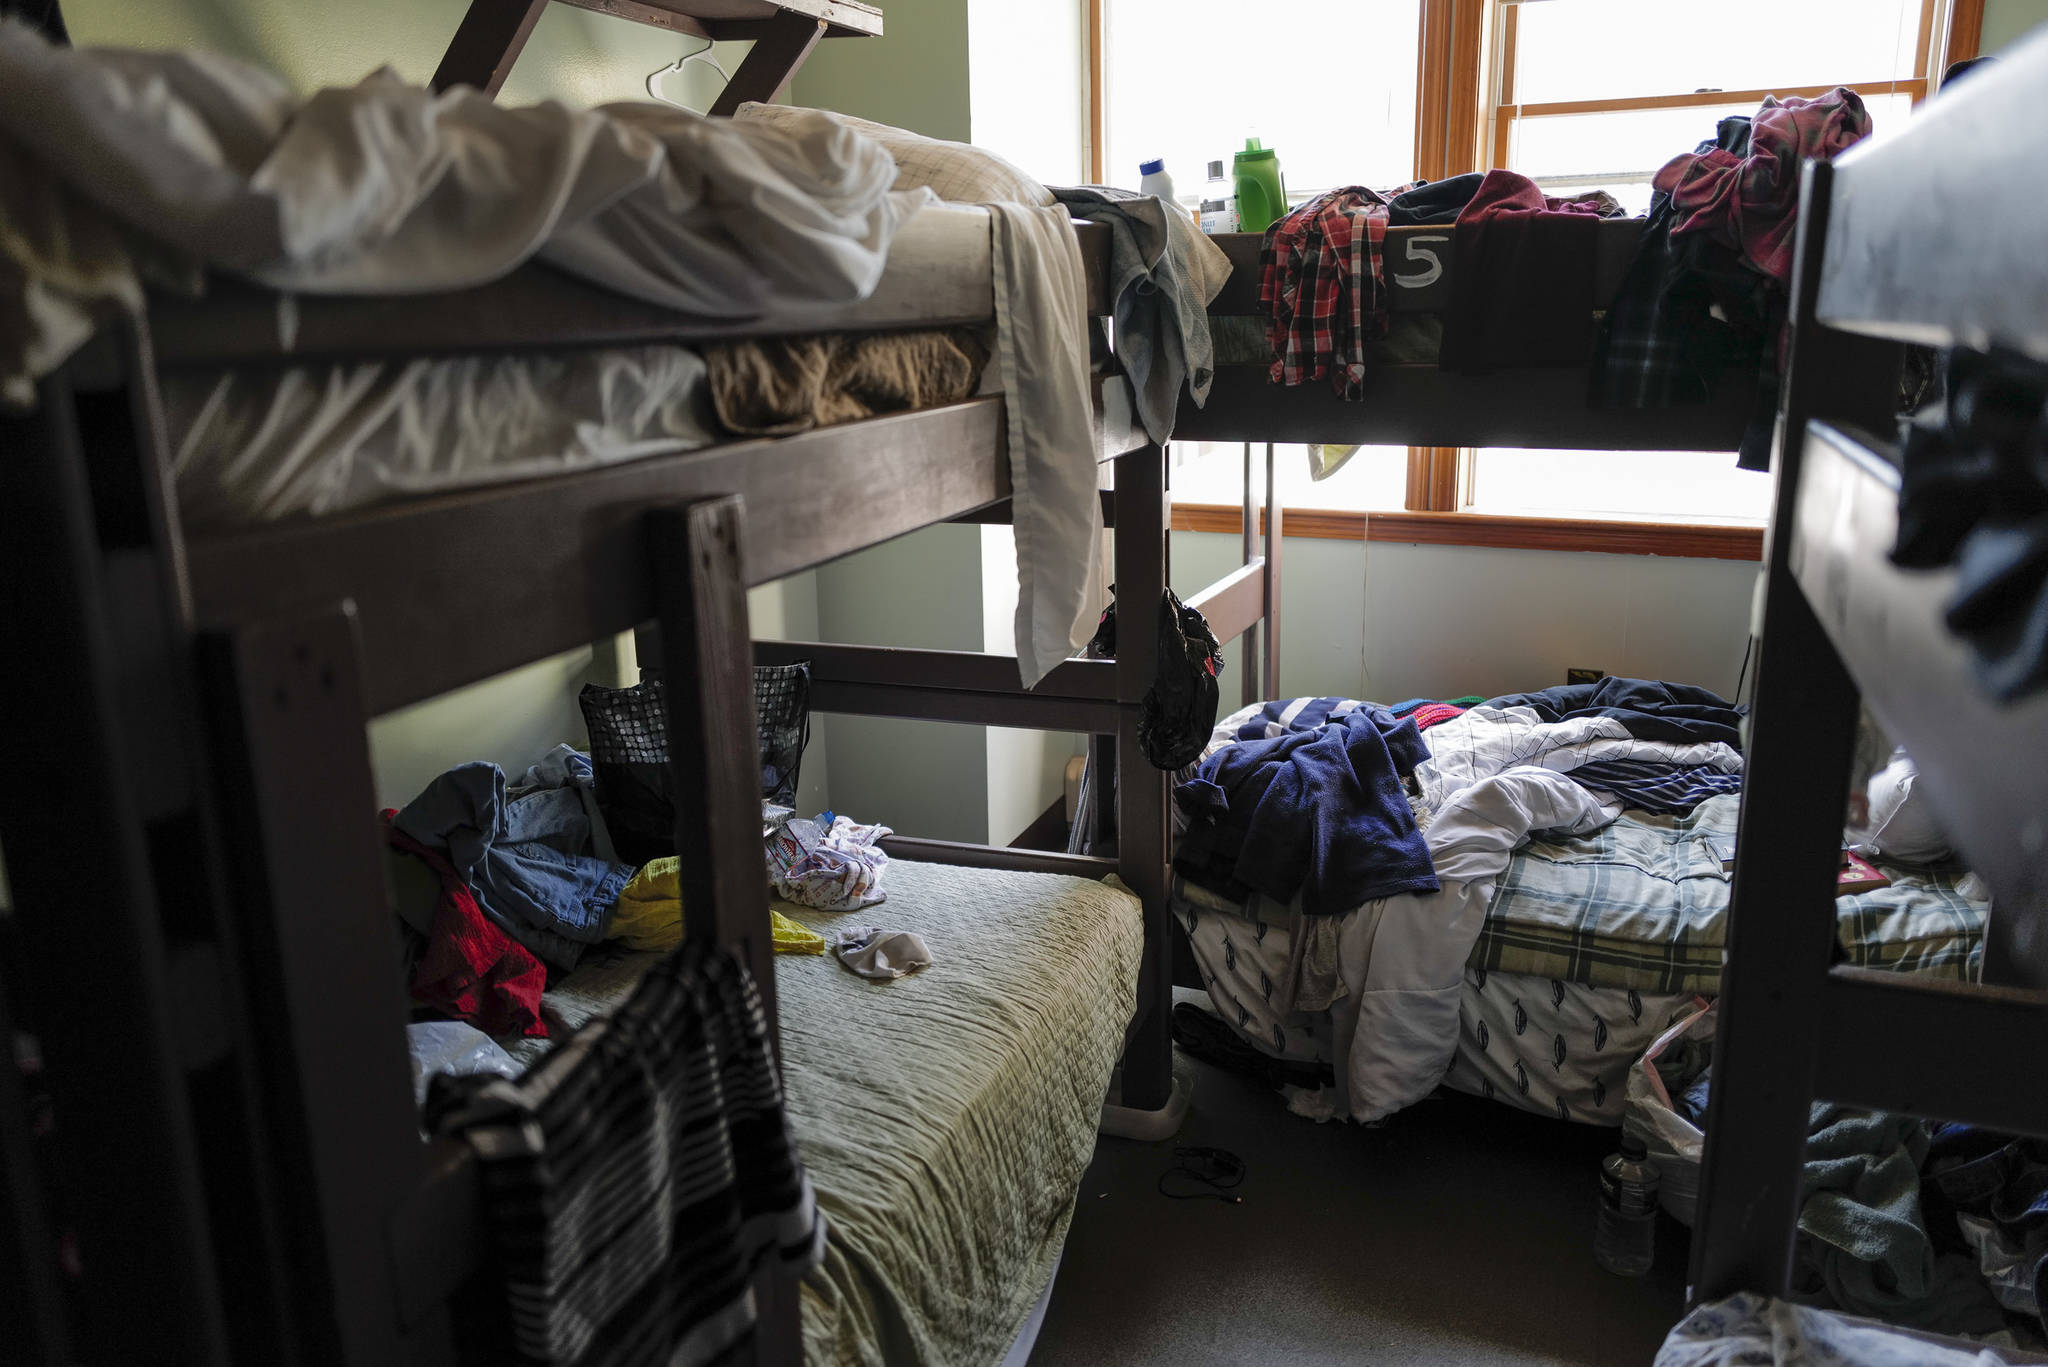 Bunk beds are crowded into the women’s dormitory at the Glory Hall on Tuesday, Aug. 6, 2019. Fundraising is currently underway to buy property in the airport area for a new facility. (Michael Penn | Juneau Empire)